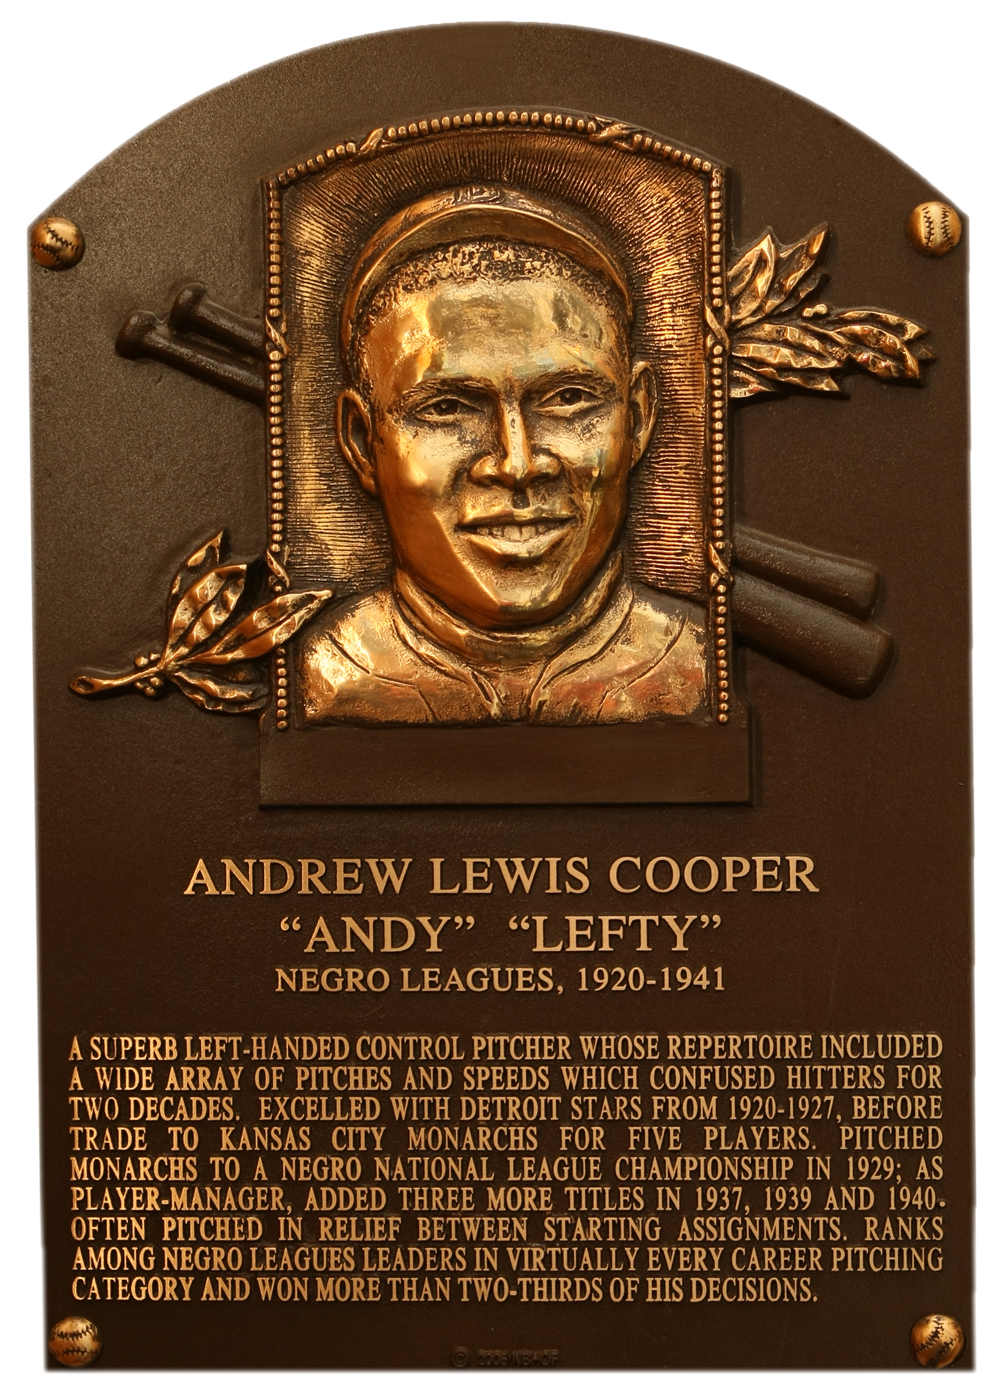 Andy Cooper Hall of Fame plaque